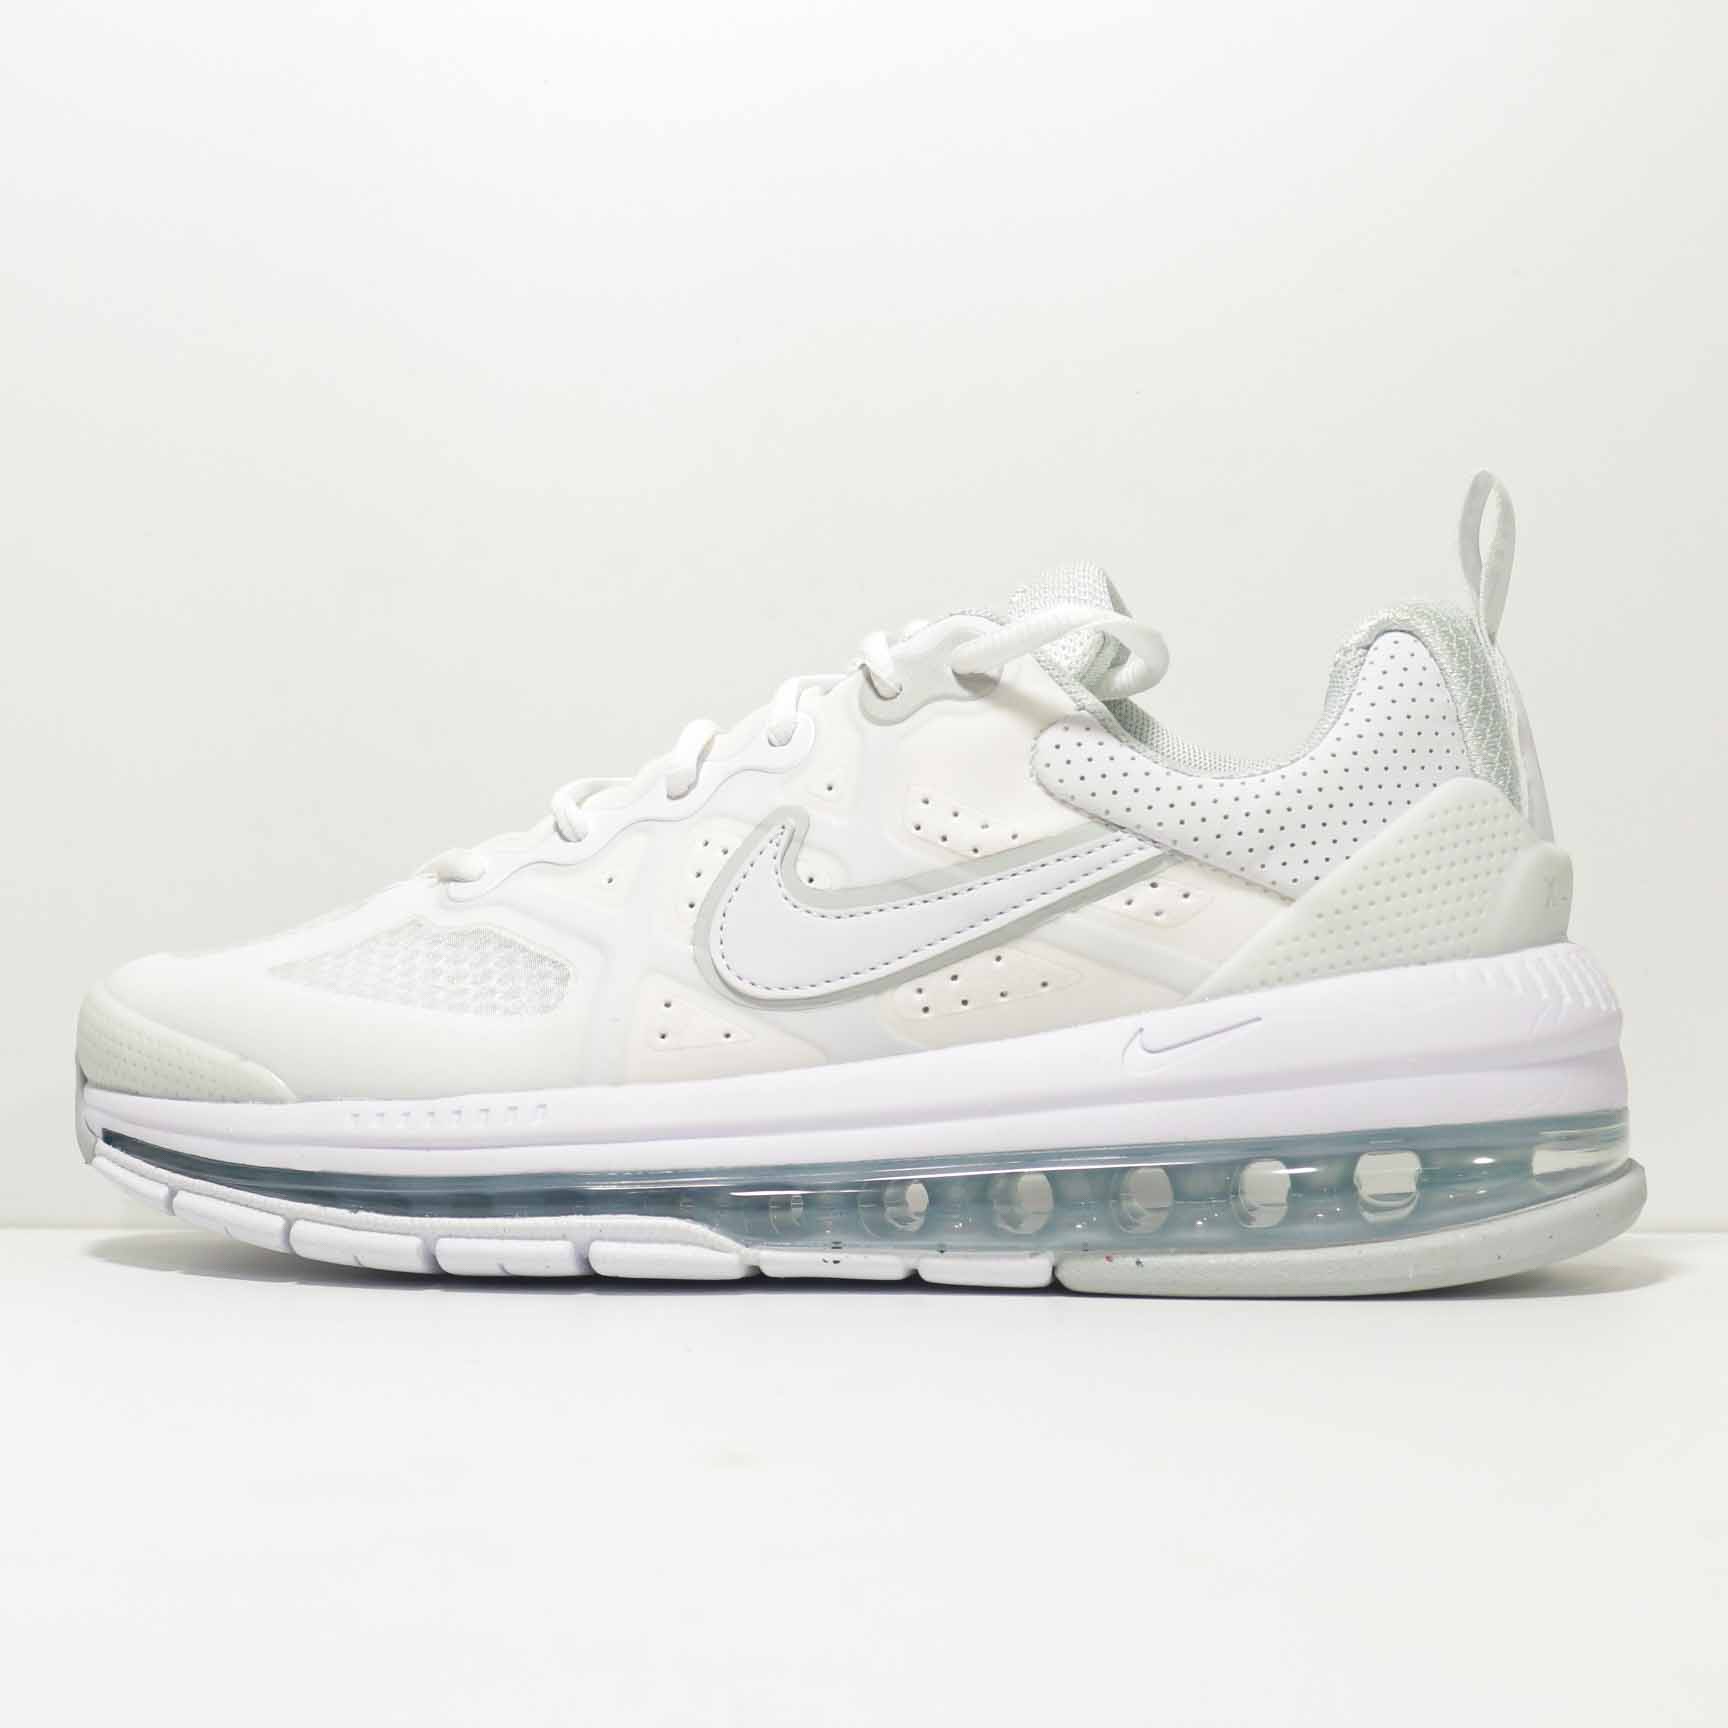 2021 Women Nike Air Max Genome Pure White Shoes